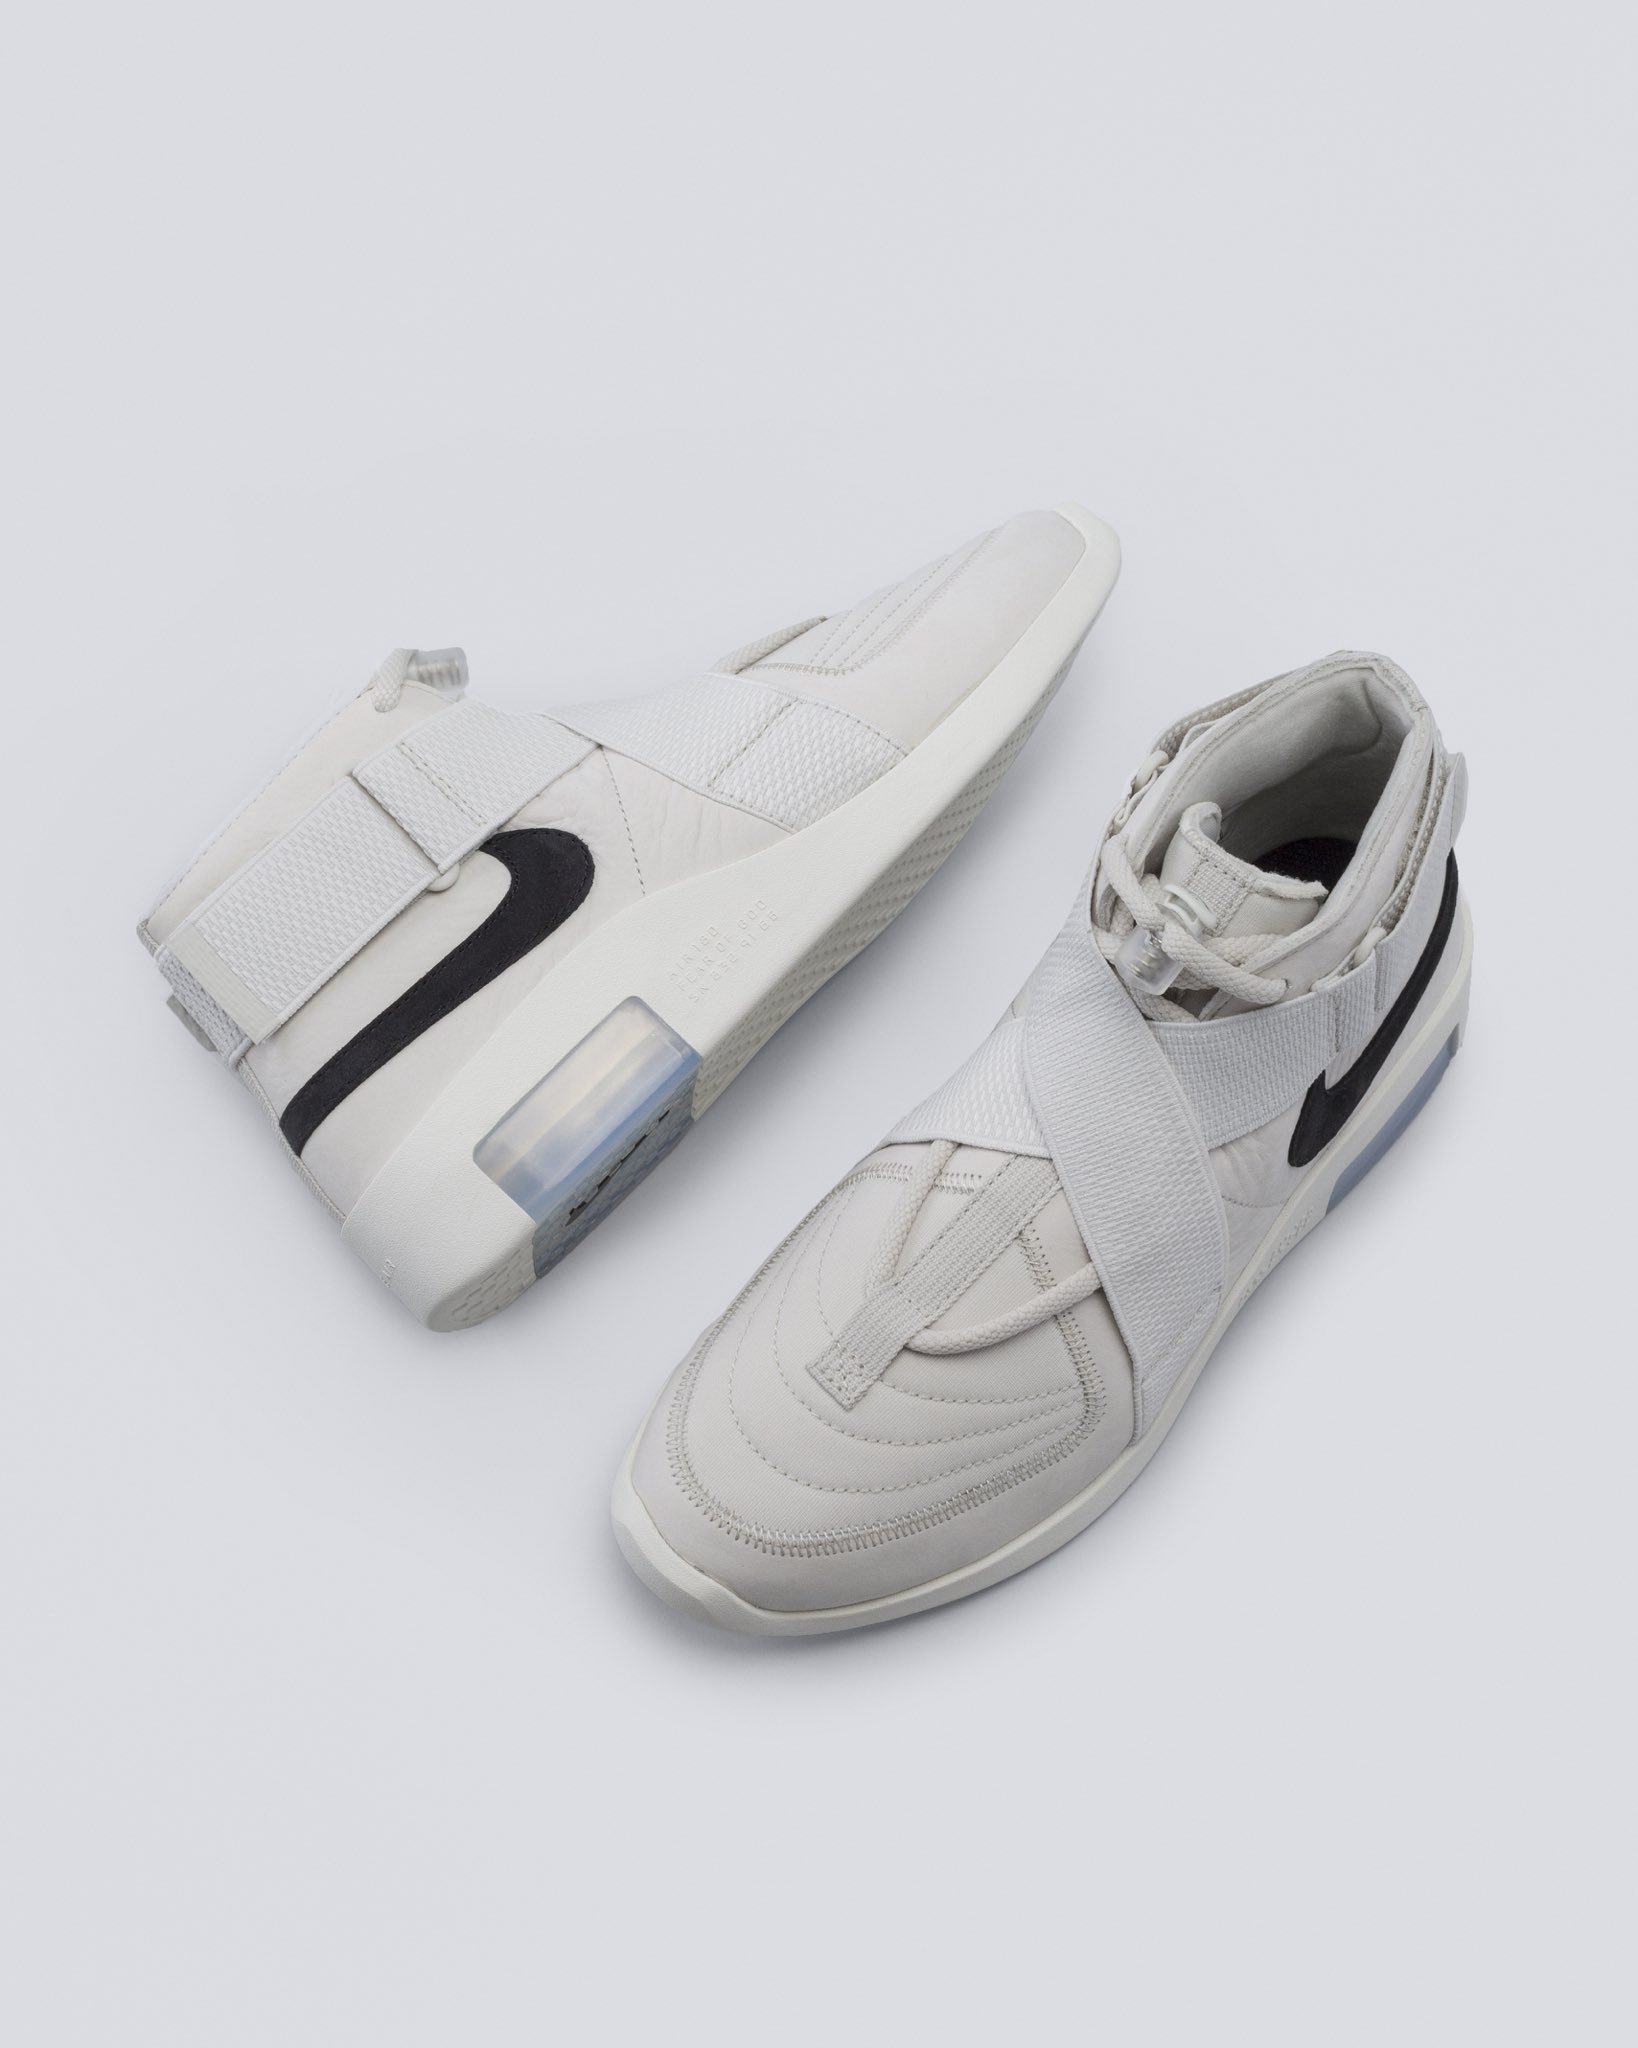 jerarquía Sip Facultad StockX on Twitter: "Featuring straps inspired by the original Air Raid  outdoor basketball sneaker of the '90s, Jerry Lorenzo and Nike find the  perfect combination of luxury, street style and function. Shop